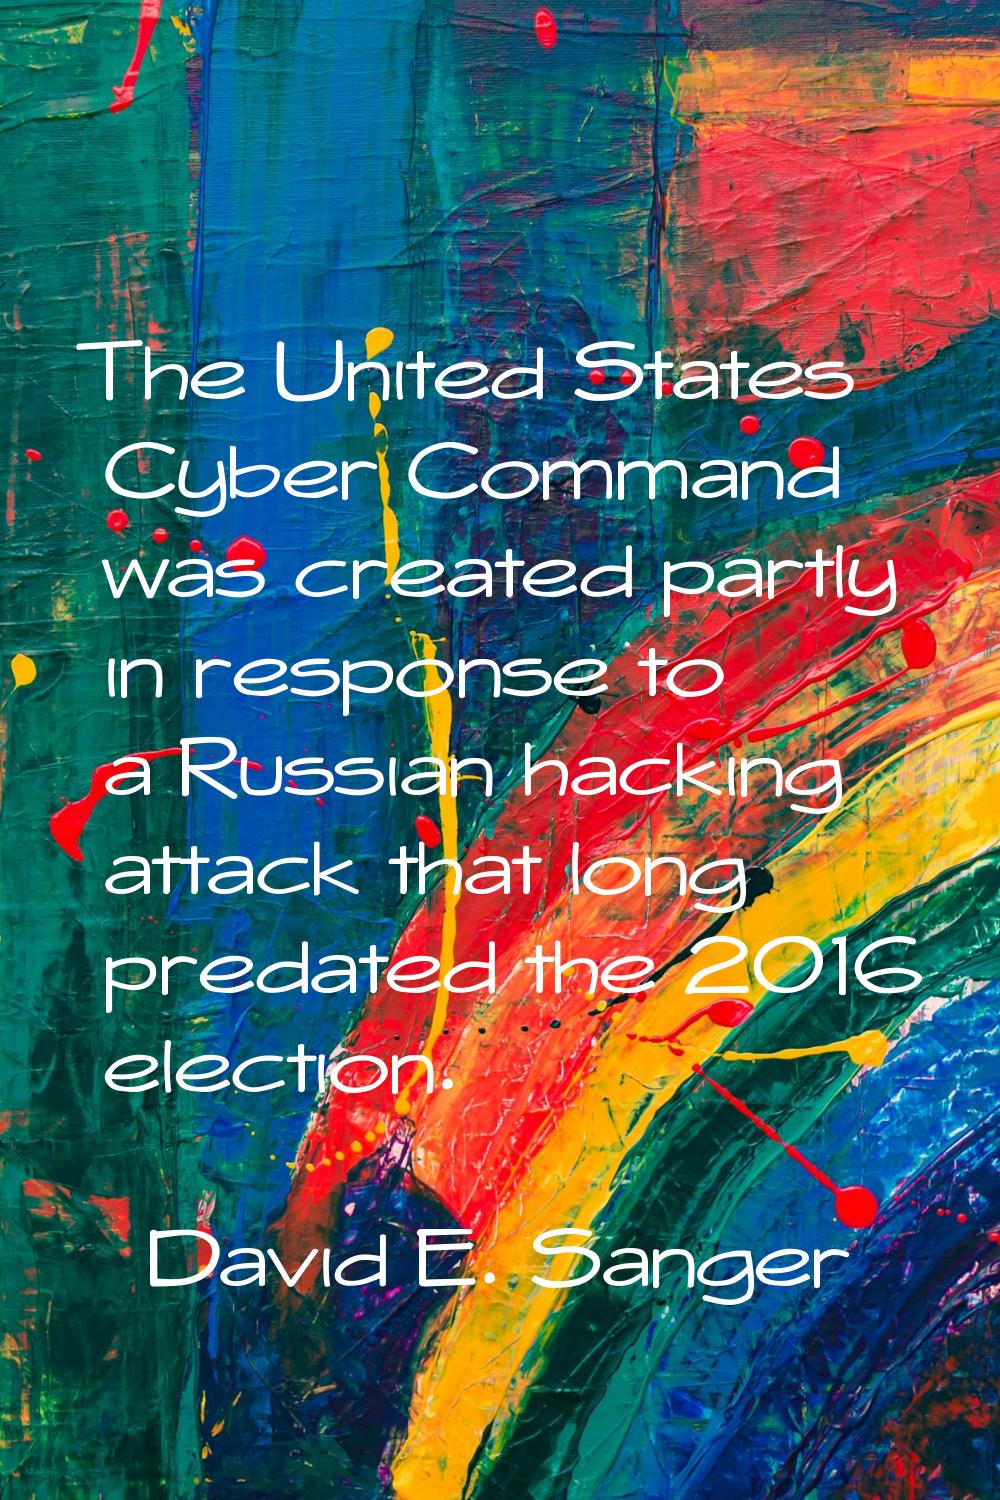 The United States Cyber Command was created partly in response to a Russian hacking attack that lon